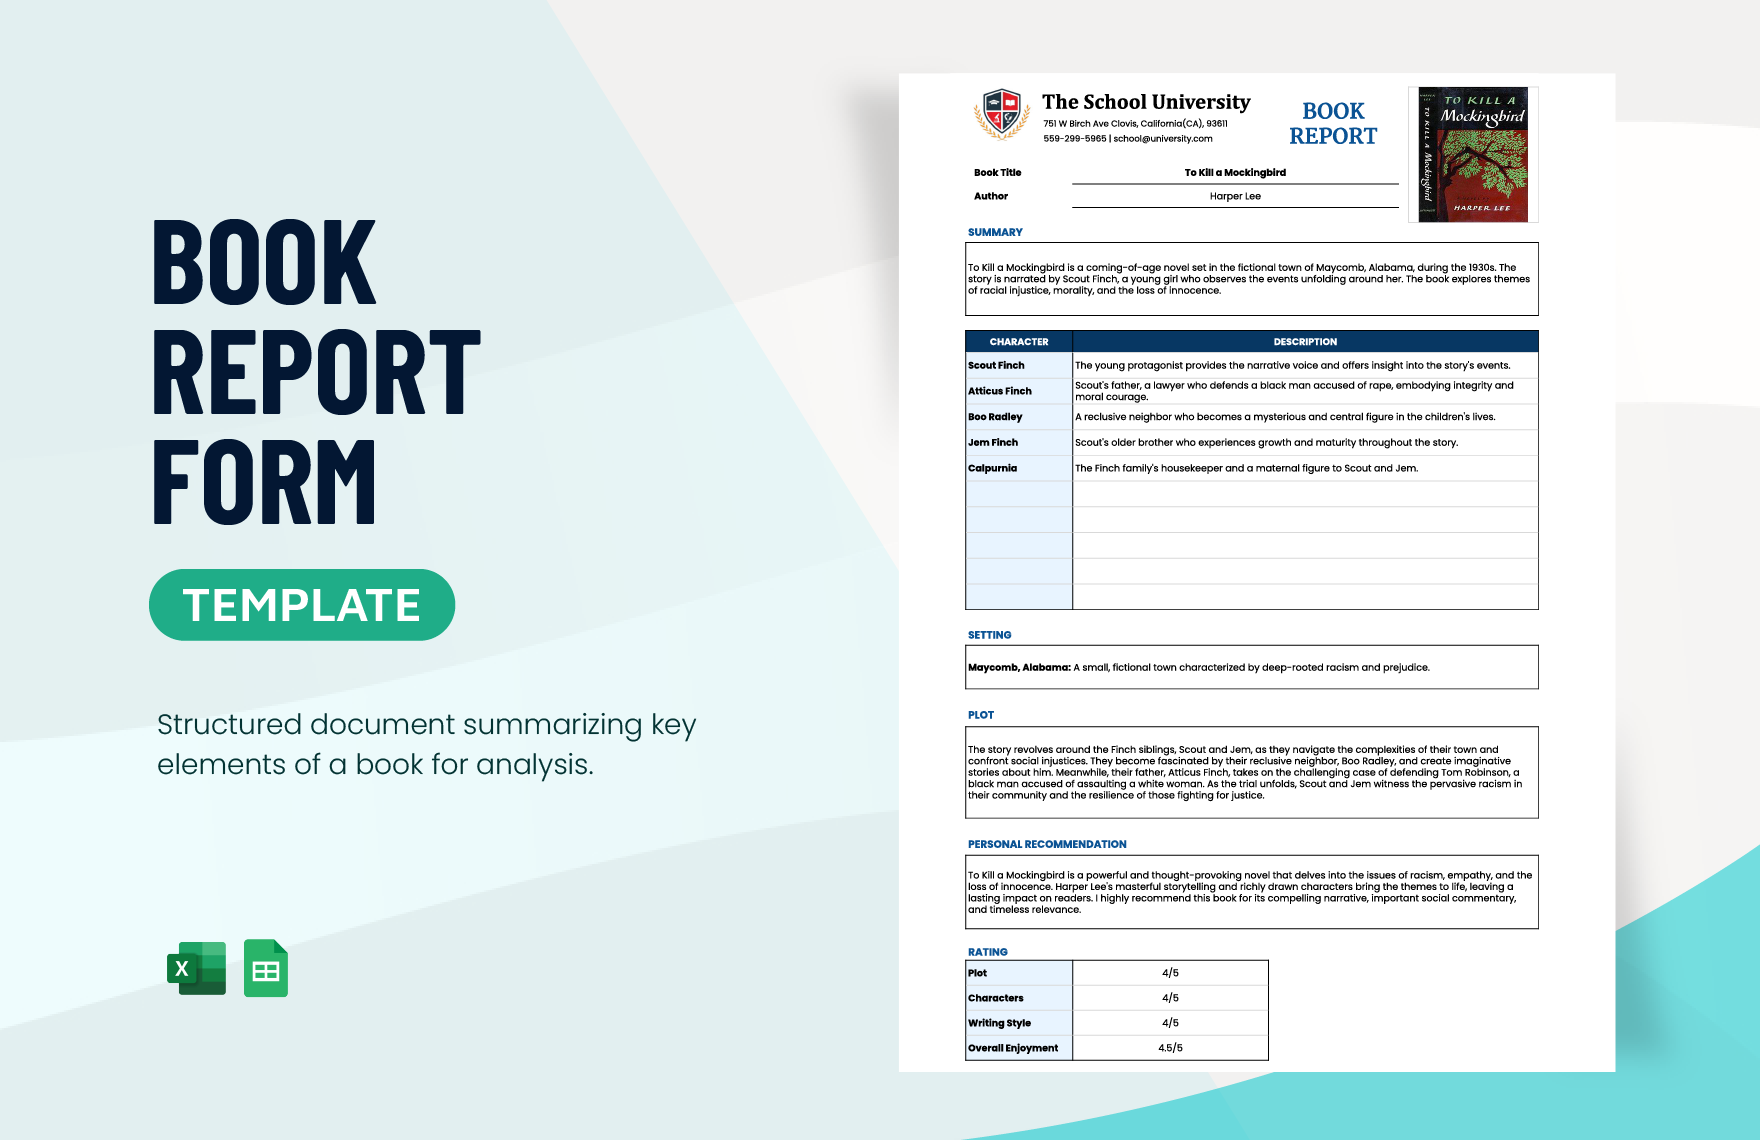 Book Report Form Template in Excel, Google Sheets